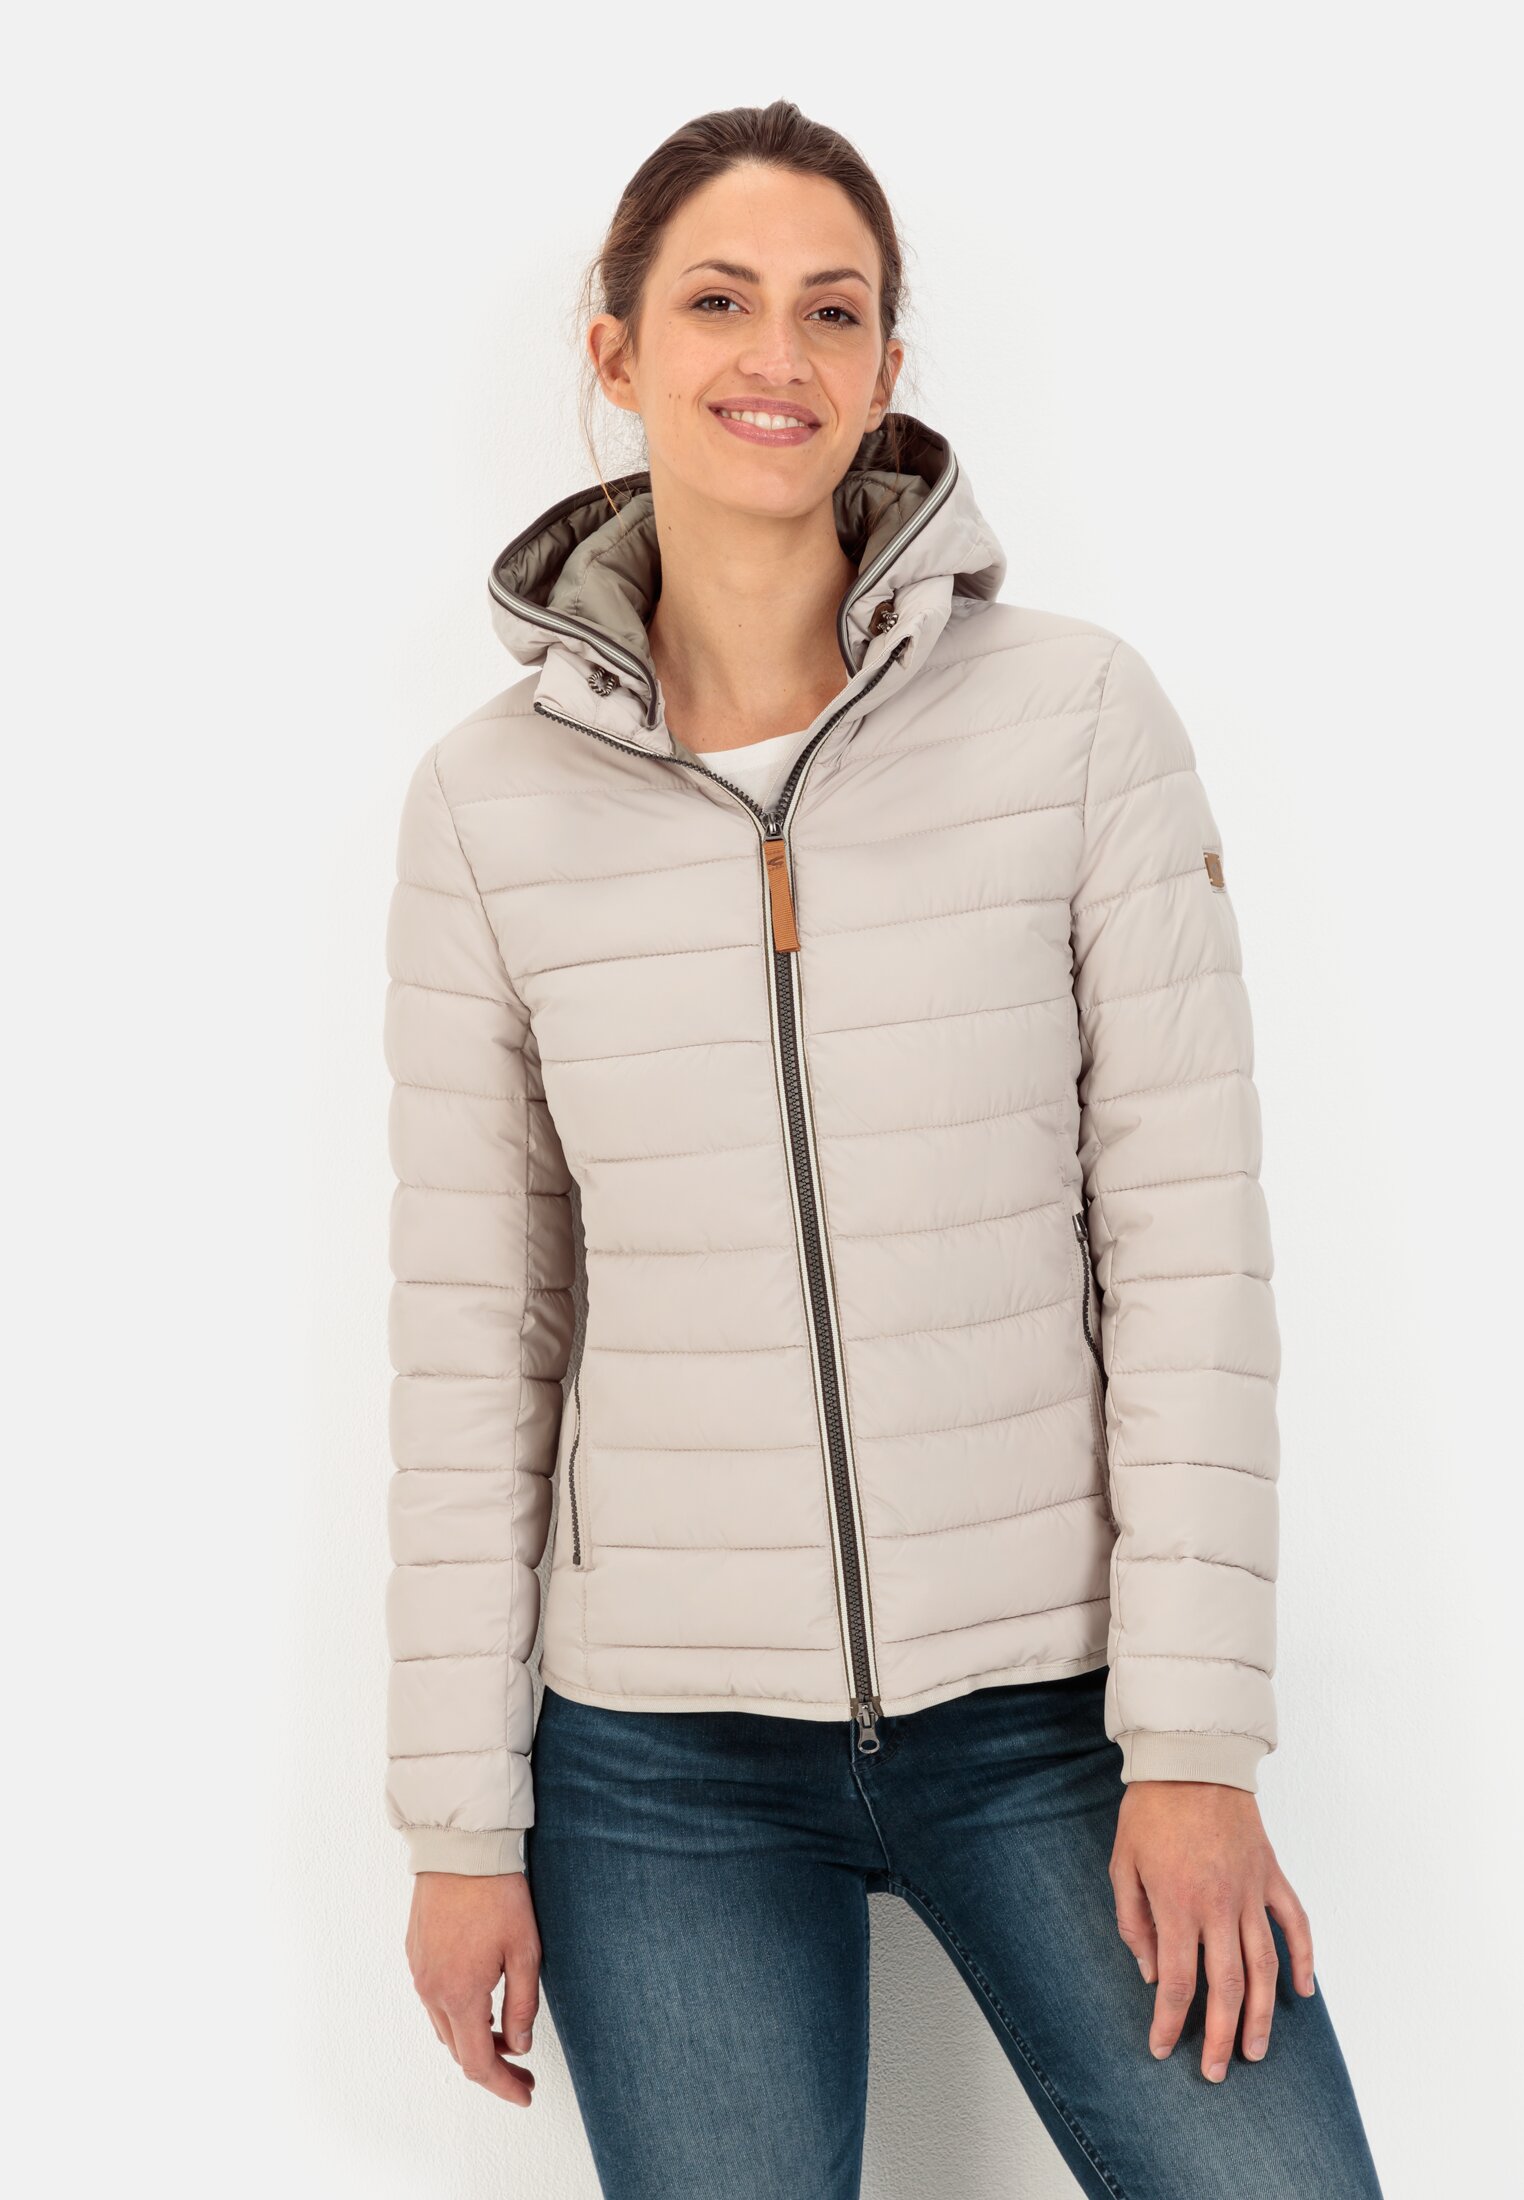 jacket Damen for | Almond in camel 34 active Quilted |